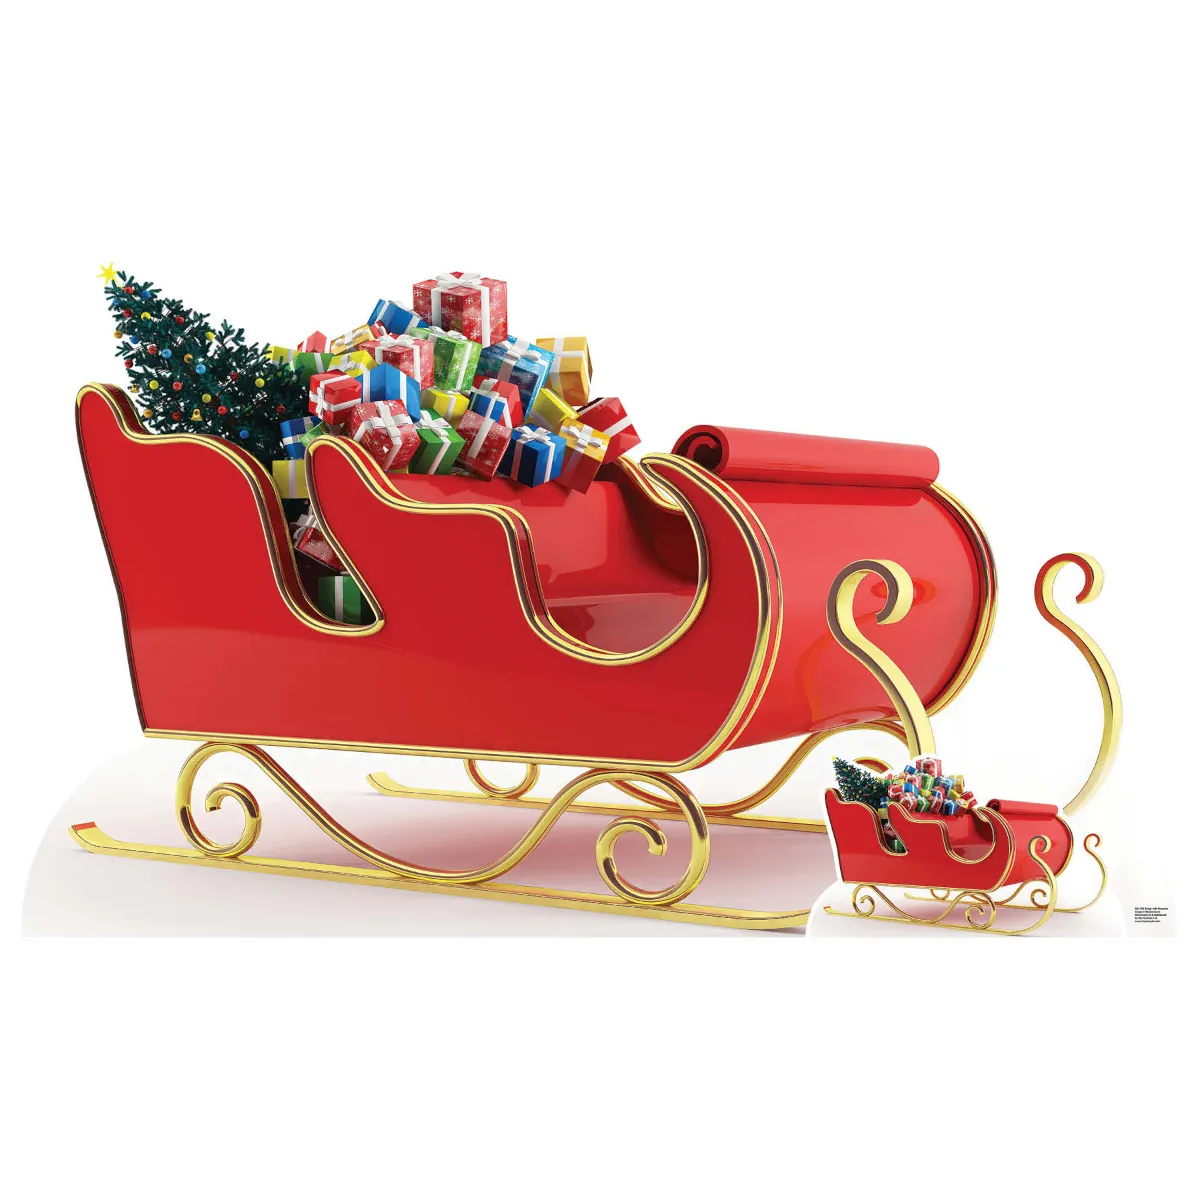 SC4198 Christmas Santa Sleigh with Presents Large + Mini Cardboard Cutout Standee Front